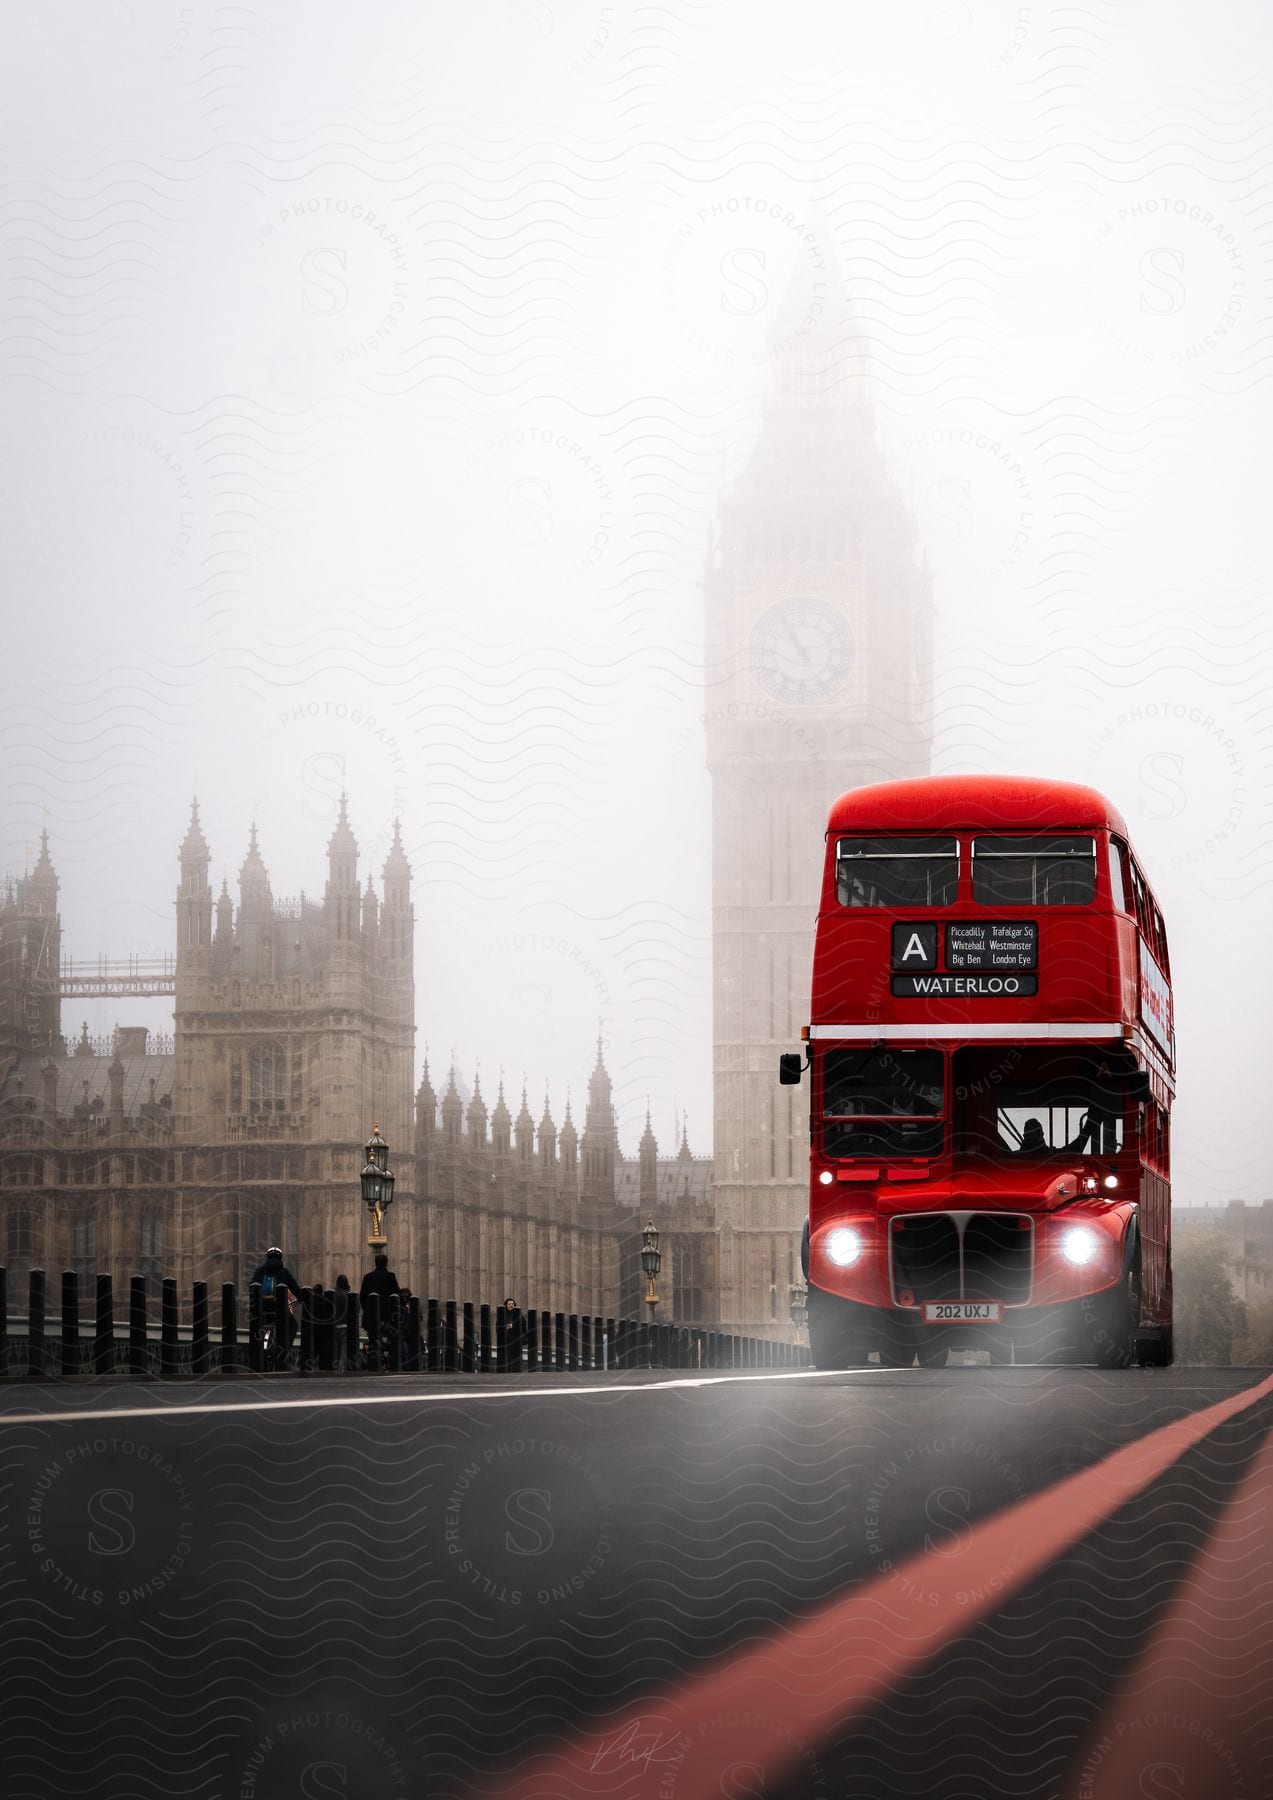 London in the fog with a red doubledecker bus and big ben as a backdrop